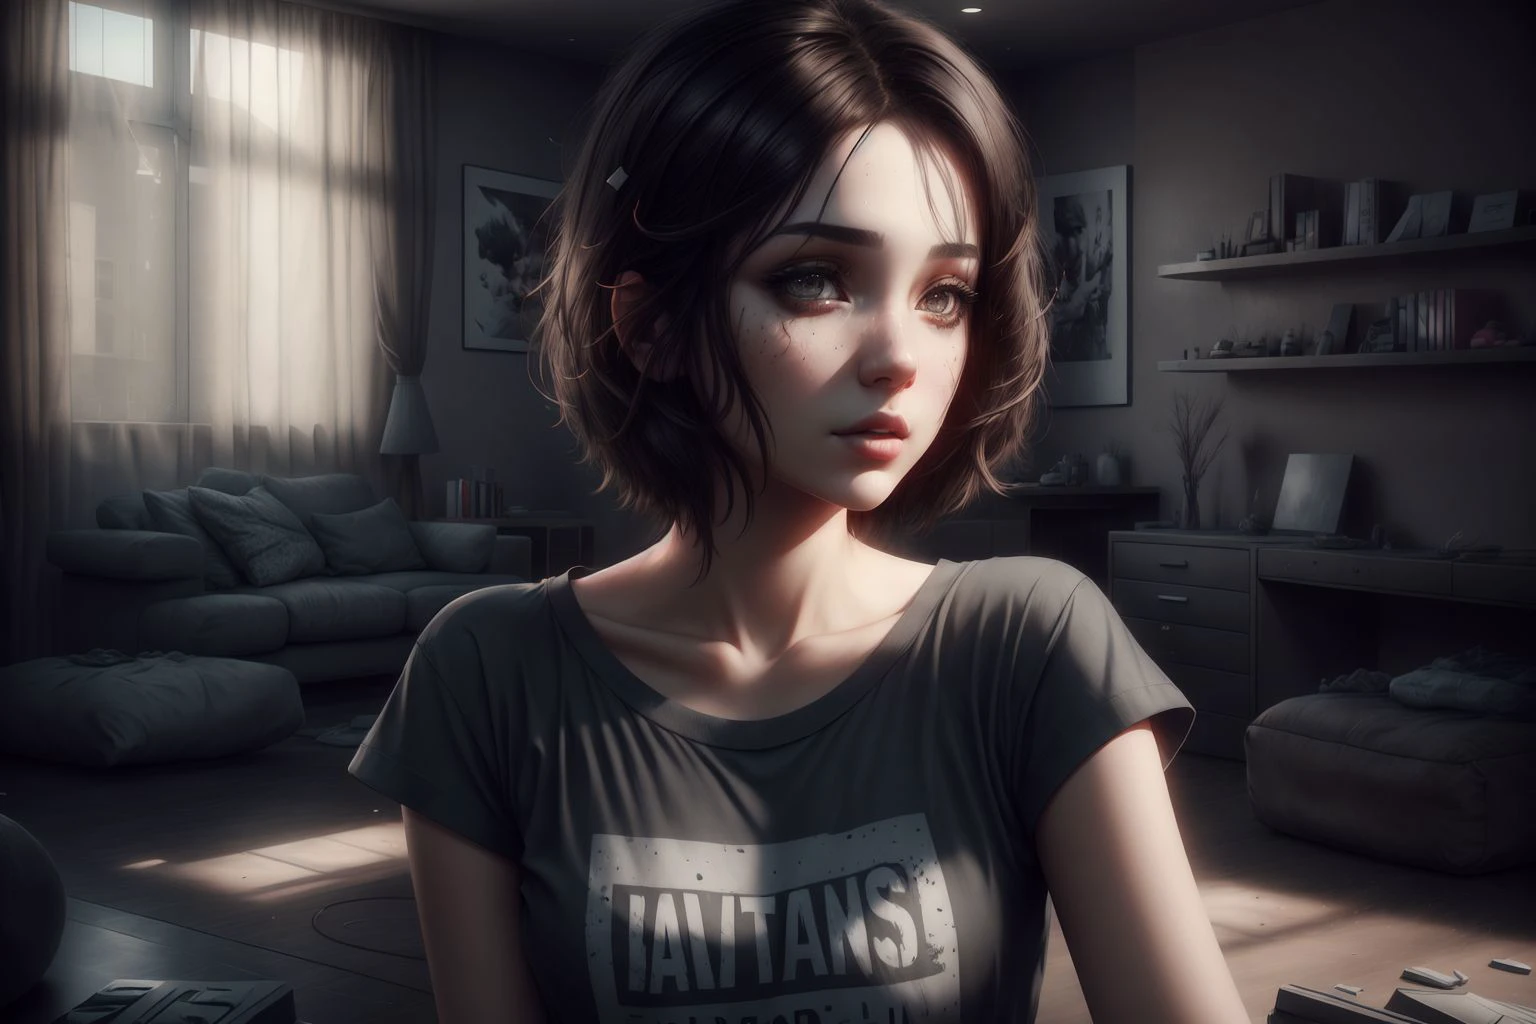 beautiful, pretty brunette, short hairs, 
(eye shadow:0.25),
tee shirt,
living room, 
3d, realistic, daylight, vibrant color, skin textured, ssao, high resolution, high quality
